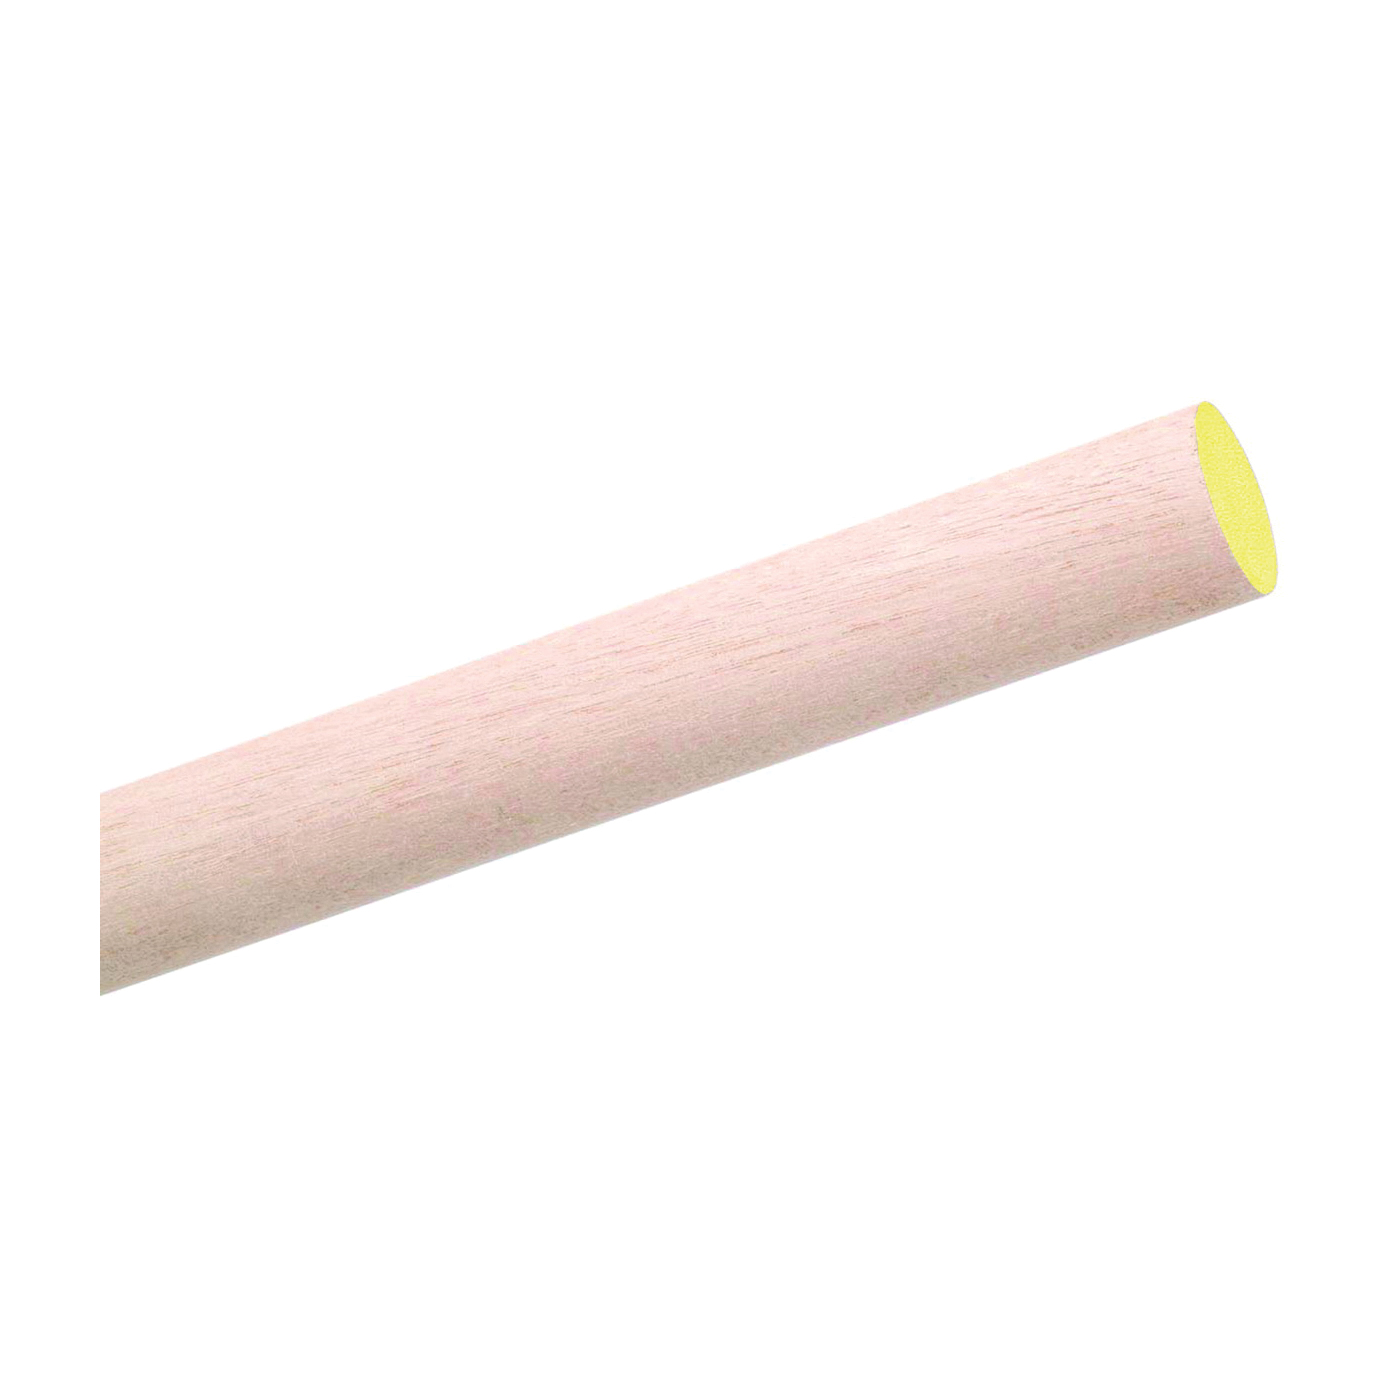 Waddell 6312UB Dowel Rod, 3/4 in Dia, 36 in L, Aspen Wood, Yellow Yellow  (Pack of 8)